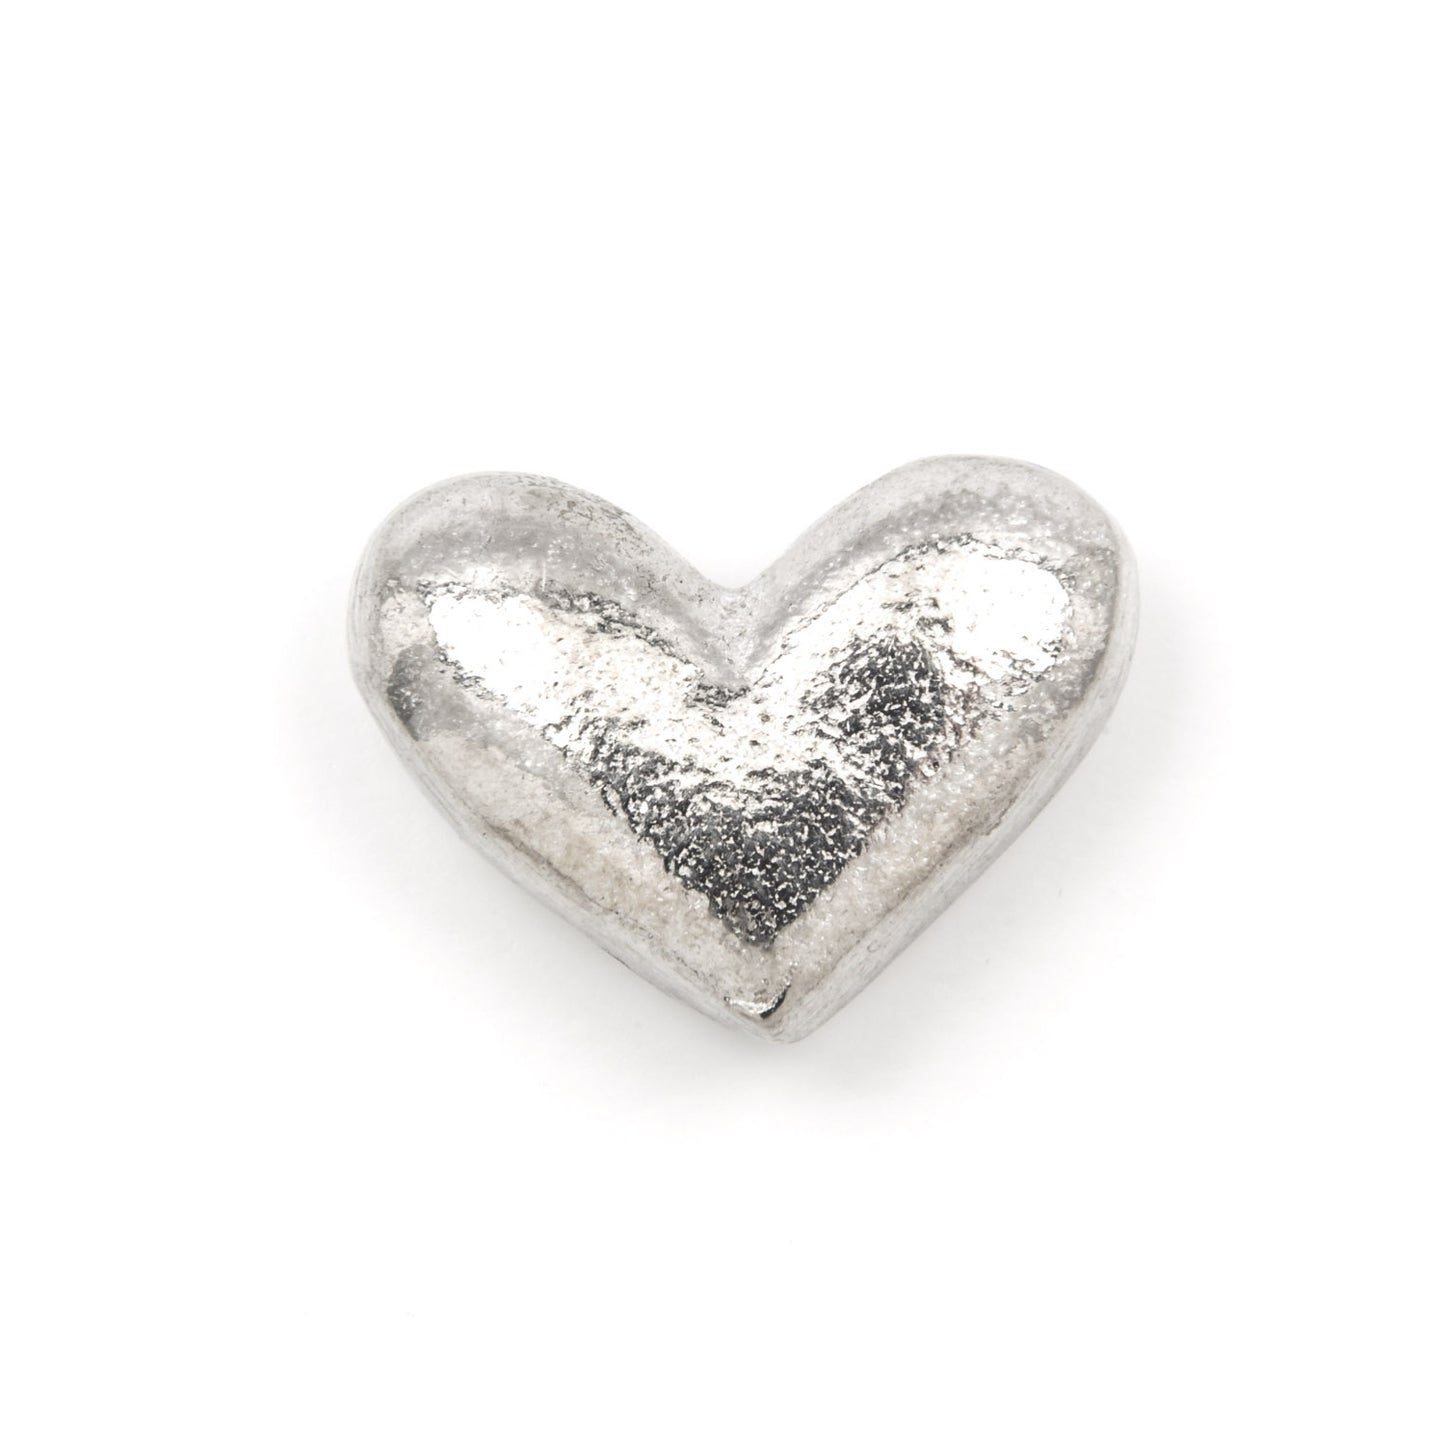 A little love from me to you - Pewter heart pocket keepsake